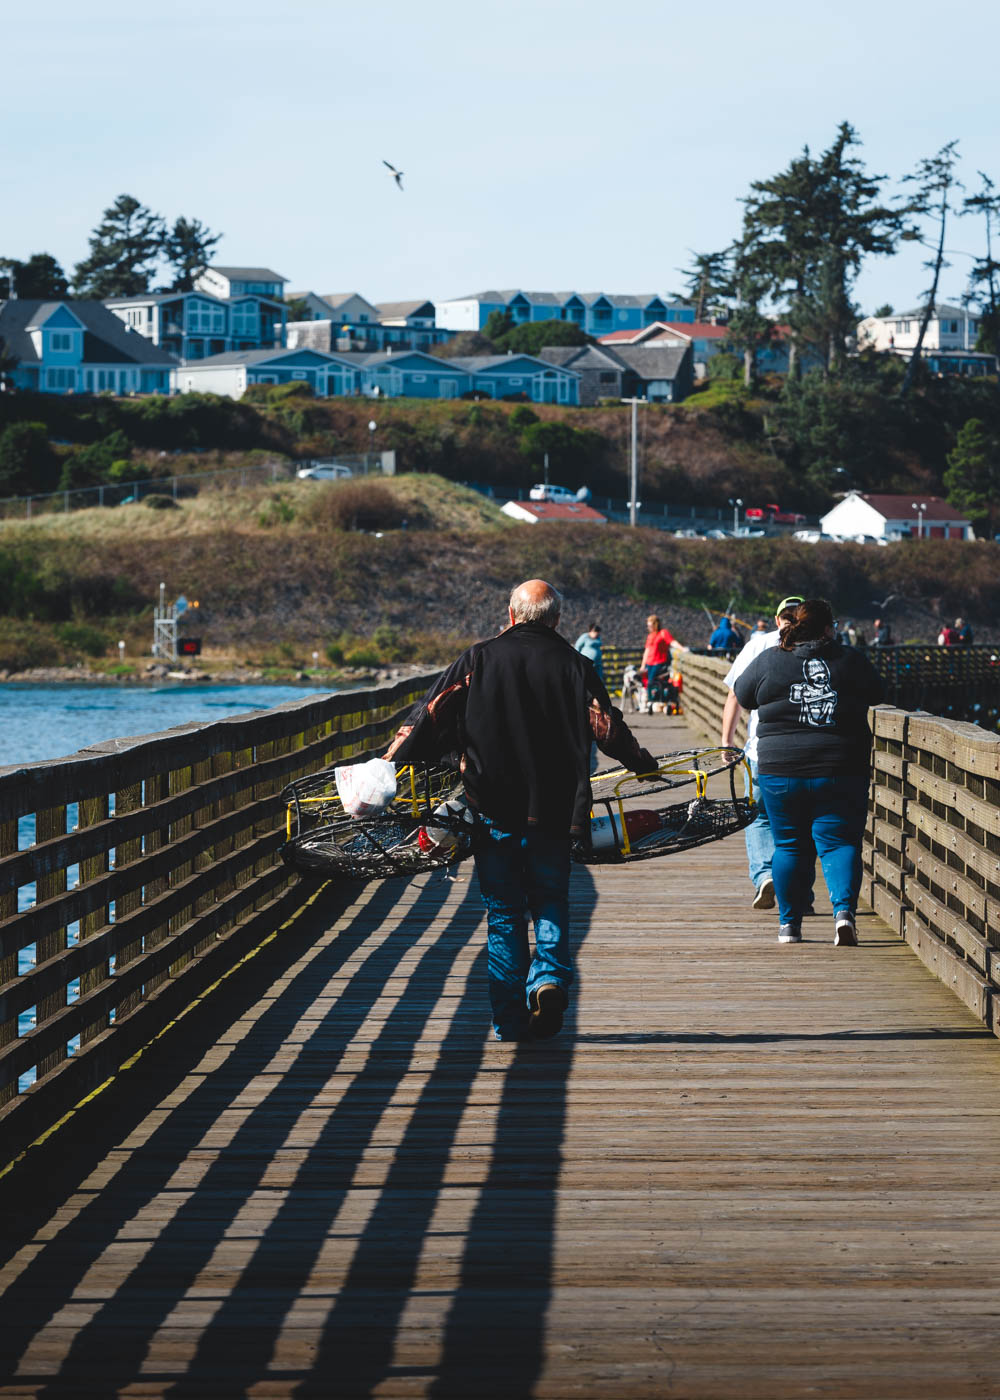 A man holding two crabbing cages walking down a pier in Newport.